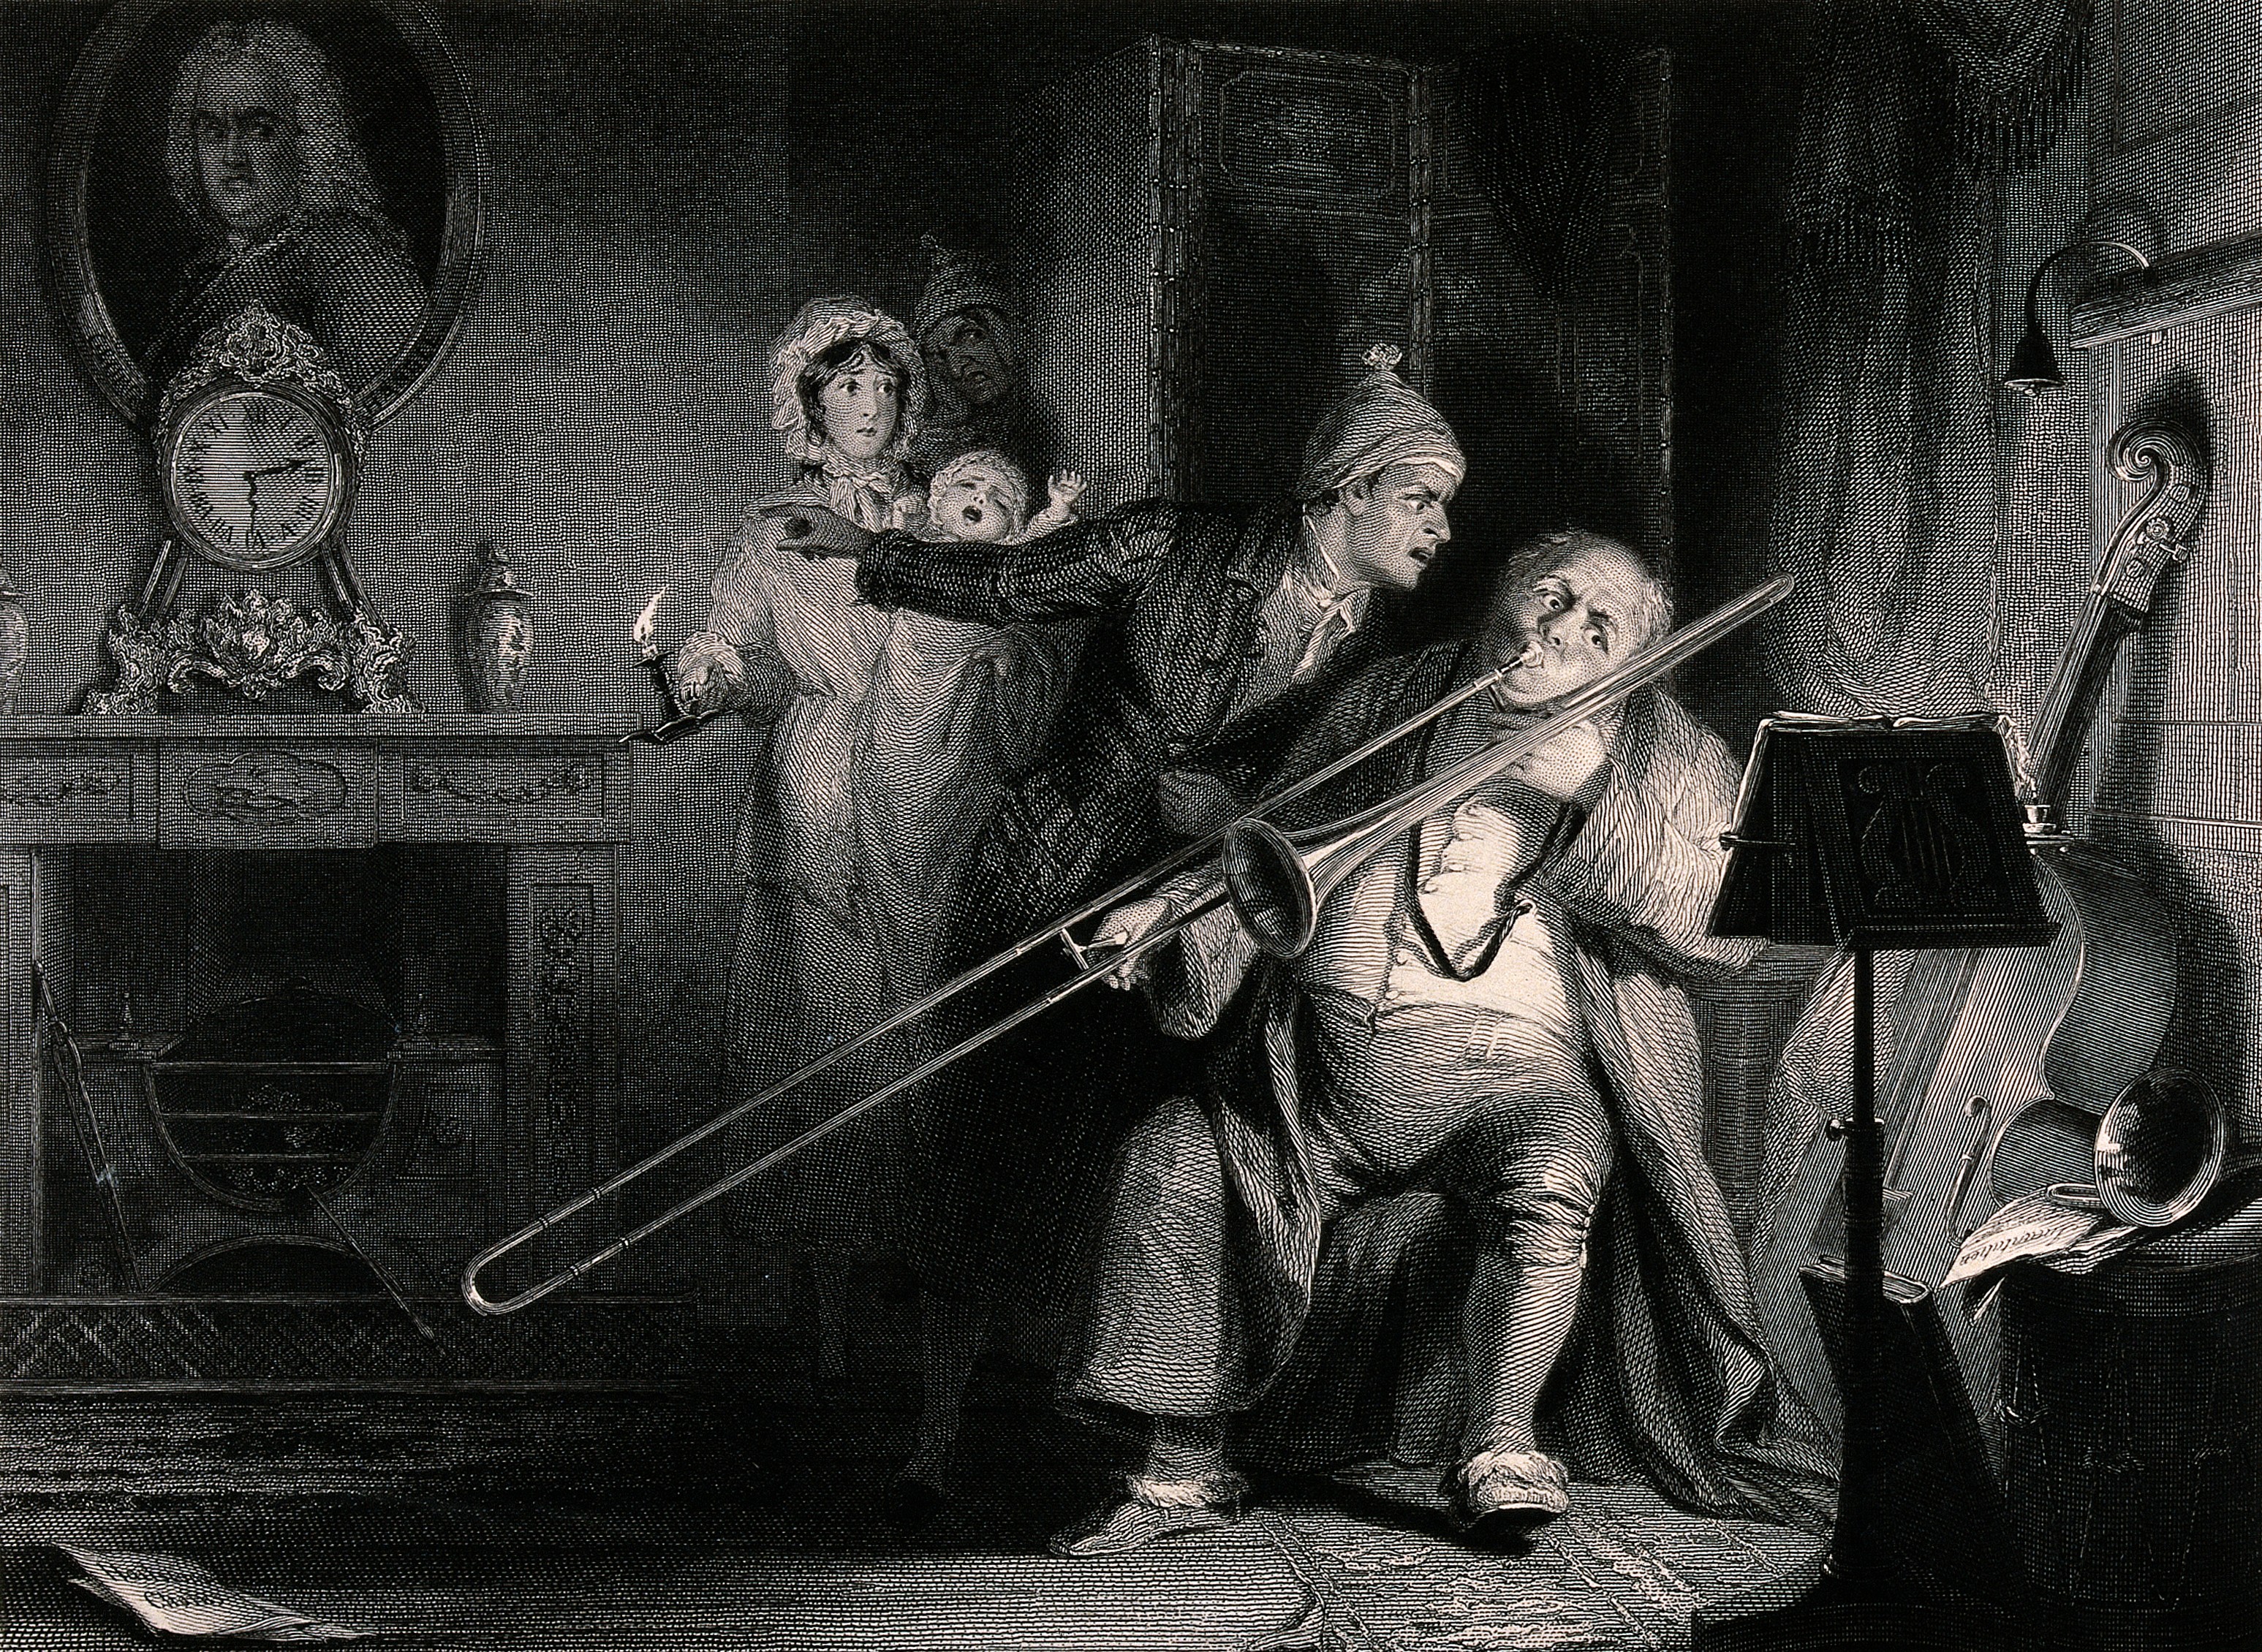 A young man is shouting at a man playing the trombone, for w Wellcome V0040376